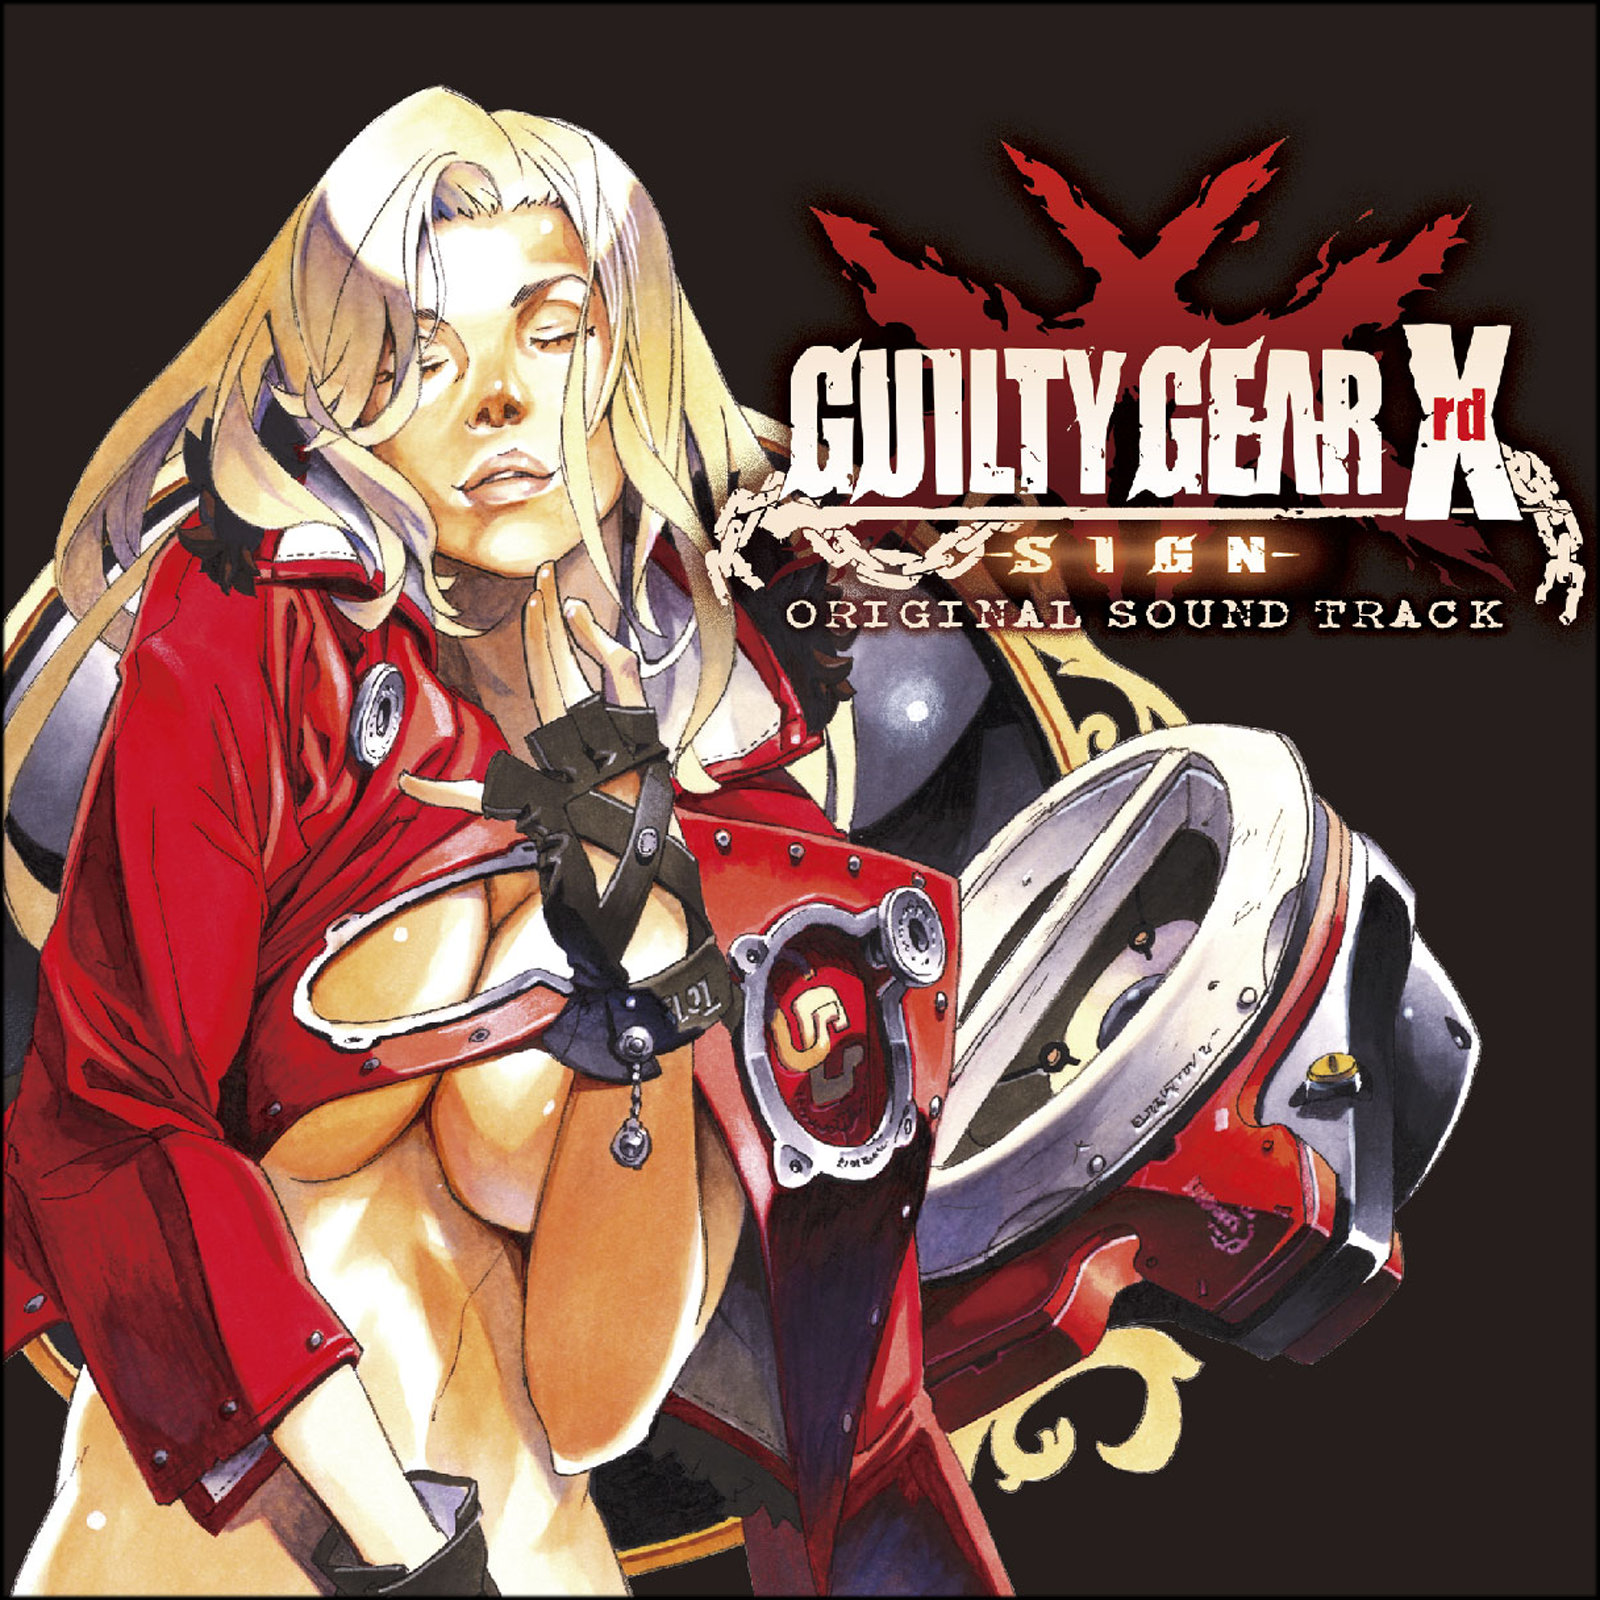 Guilty gear accent core plus r steam фото 99